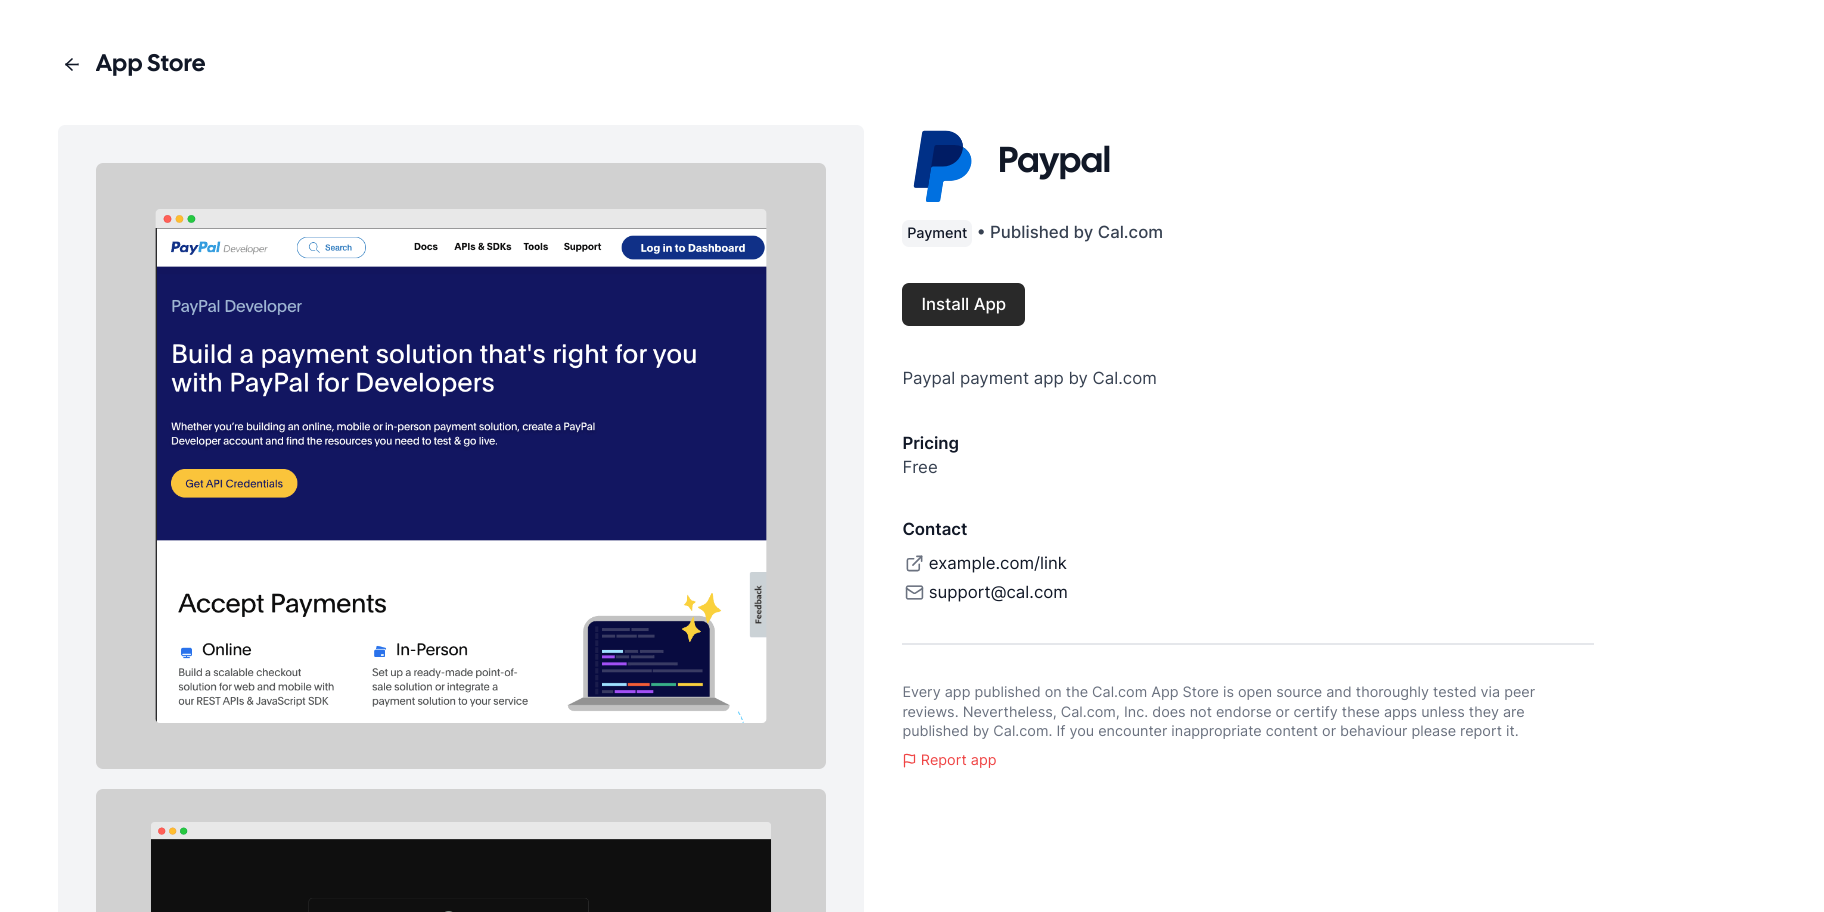 Another option for monetization: Using Cal.com with PayPal